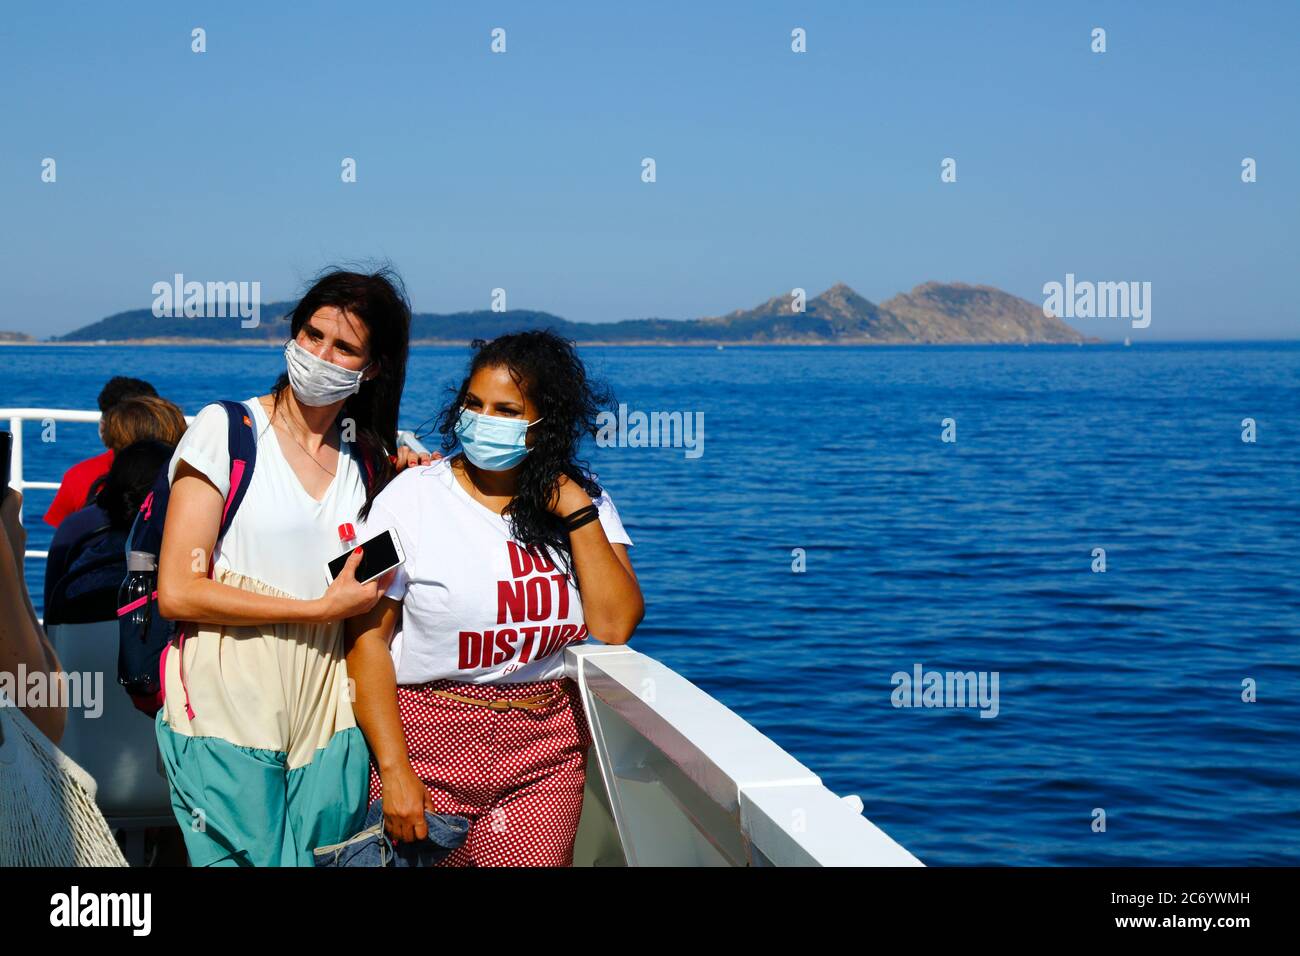 12th July 2020, Ria de Vigo, Galicia, northern Spain: Passengers wearing face masks pose for a photo on the ferry from Vigo to the Cies Islands (in background), a popular tourist destination off the coast of Galicia. Spain has relaxed travel restrictions from 21st June after a strict lockdown to control the Covid 19 coronavirus and many Spaniards are returning to the beaches. Wearing face masks is still mandatory on public transport. Stock Photo